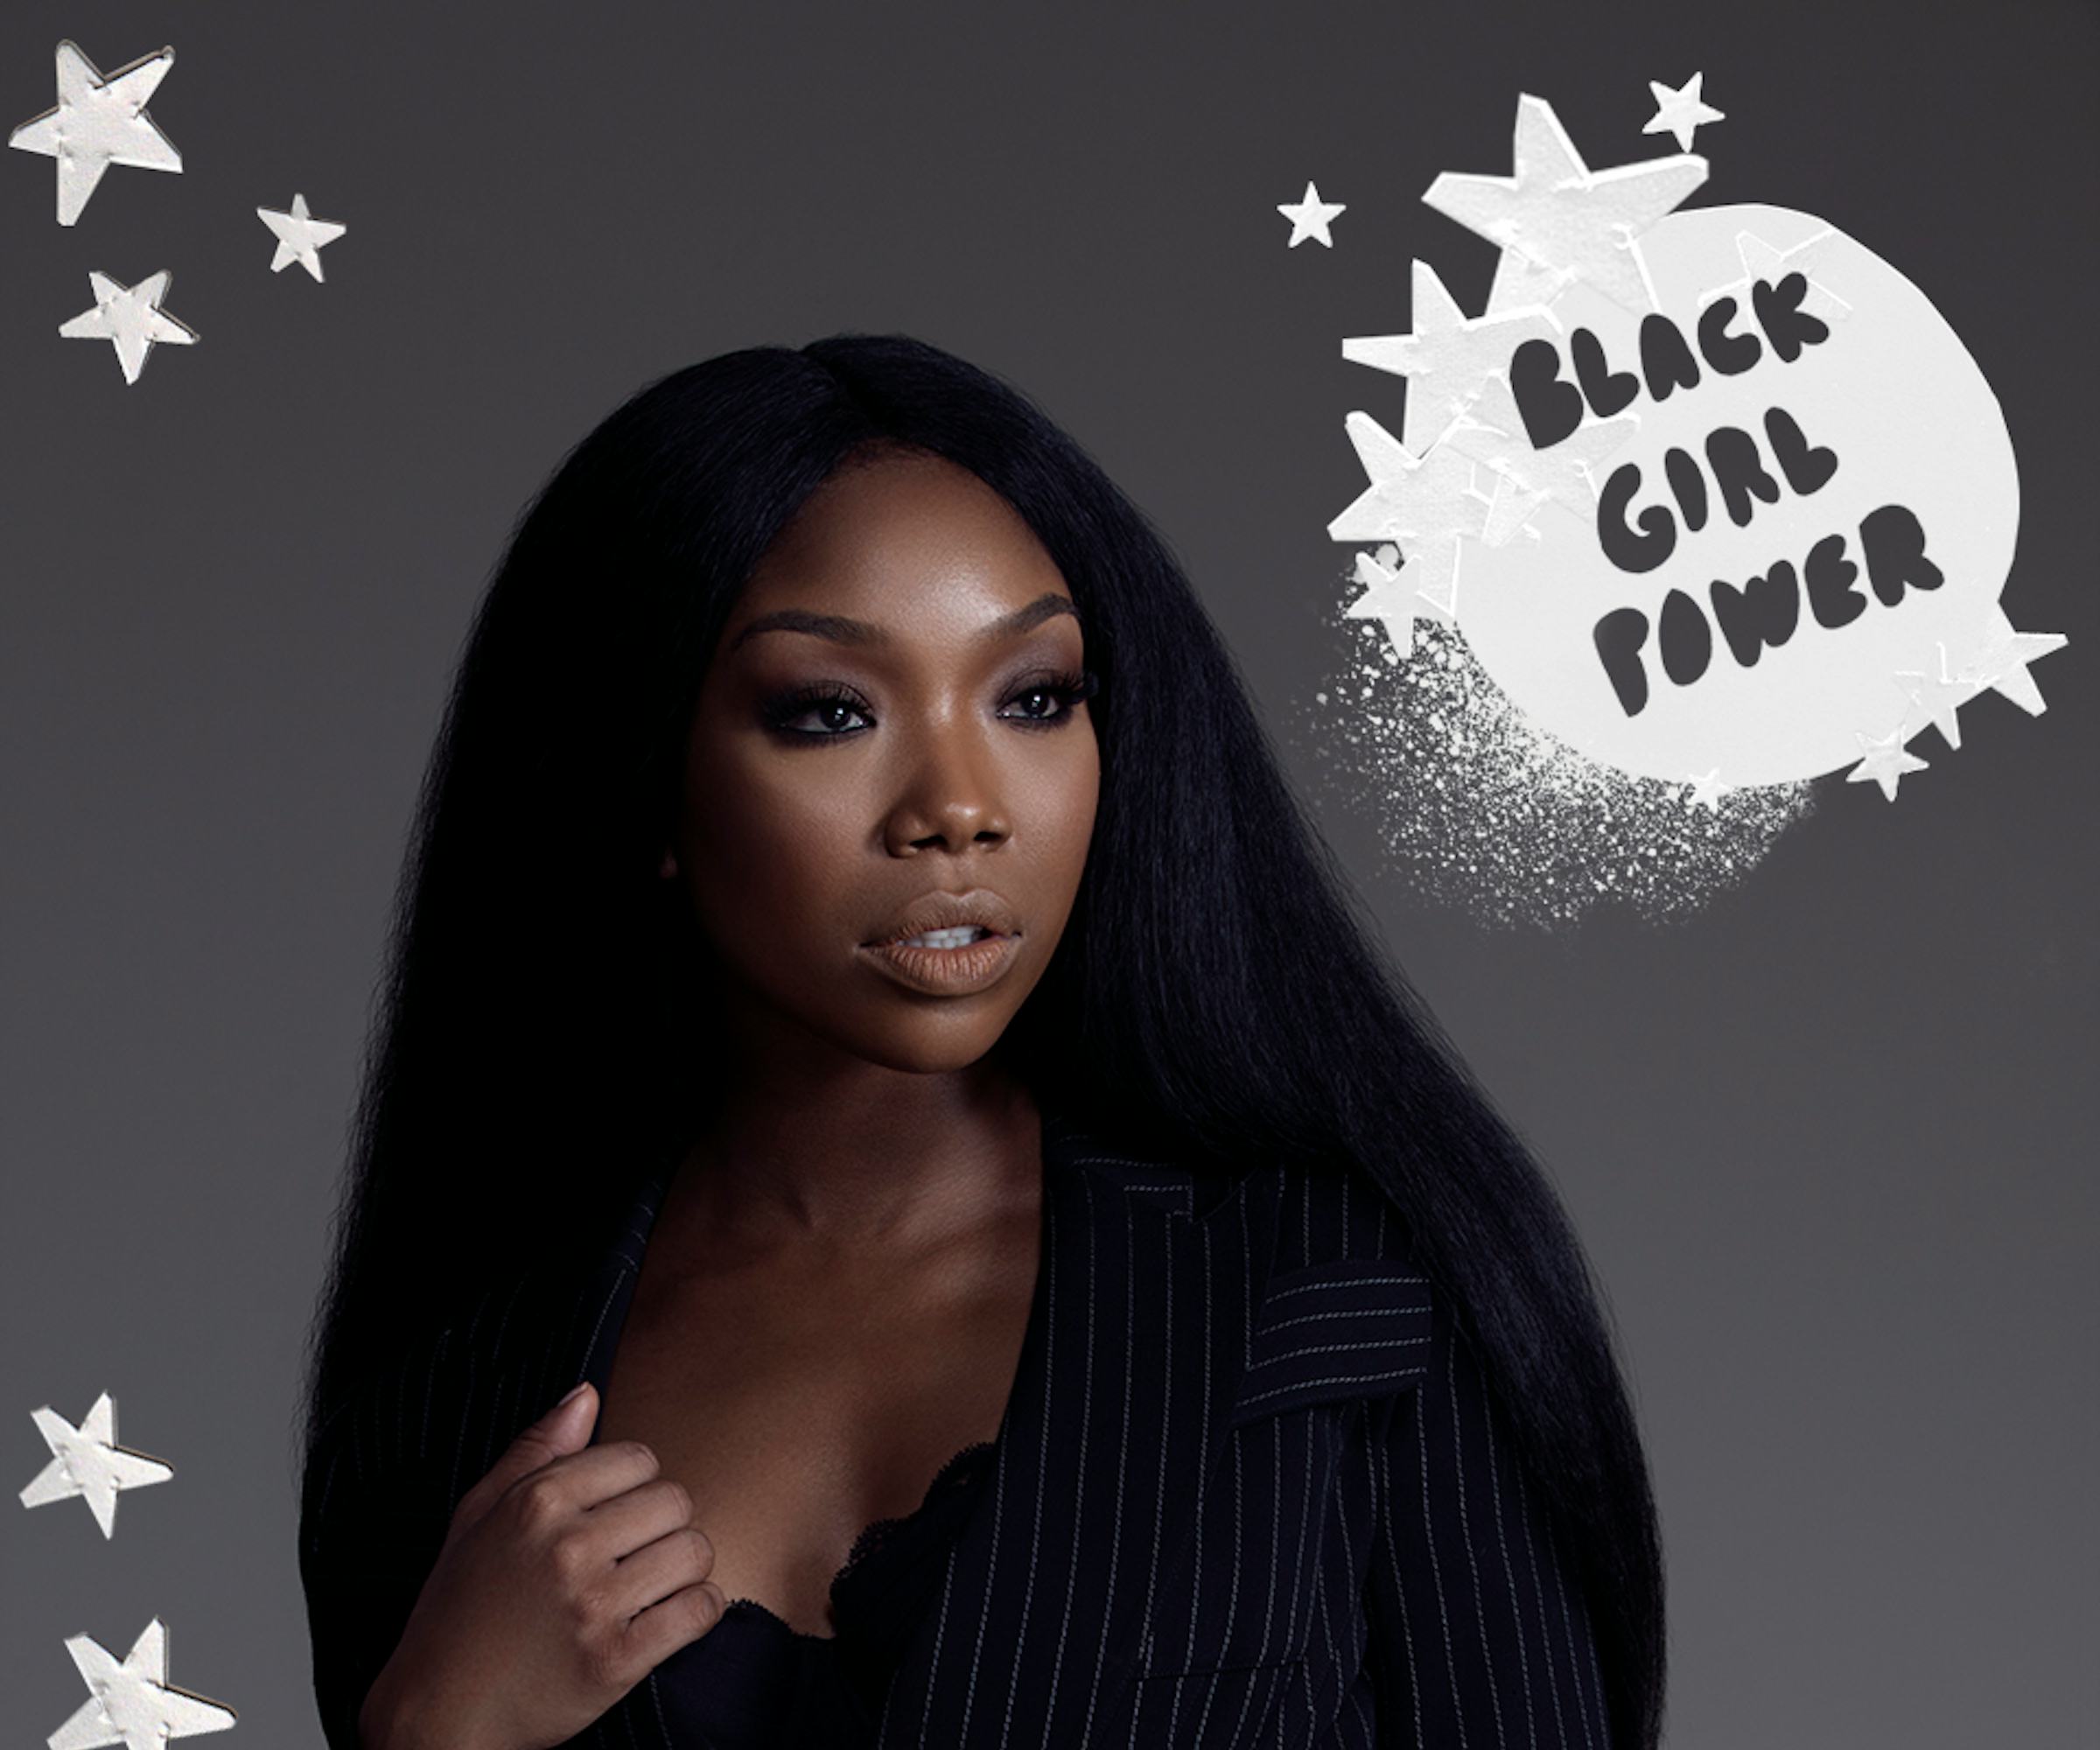 Brandy Norwood Only Wanted To Sing… Instead Brandy Became A Star